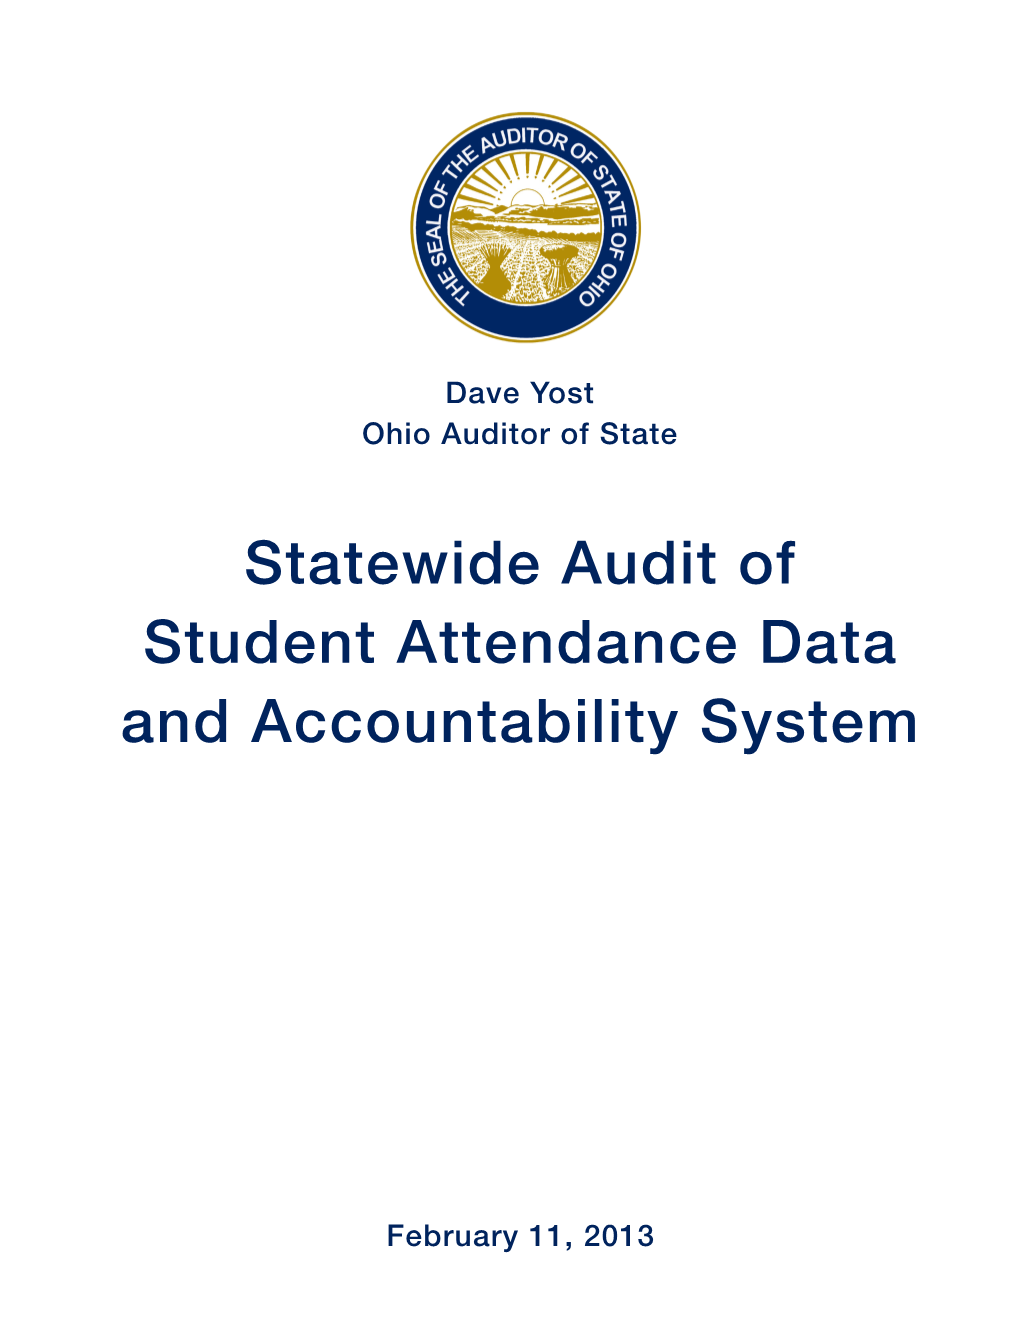 Statewide Audit of Student Attendance Data and Accountability System